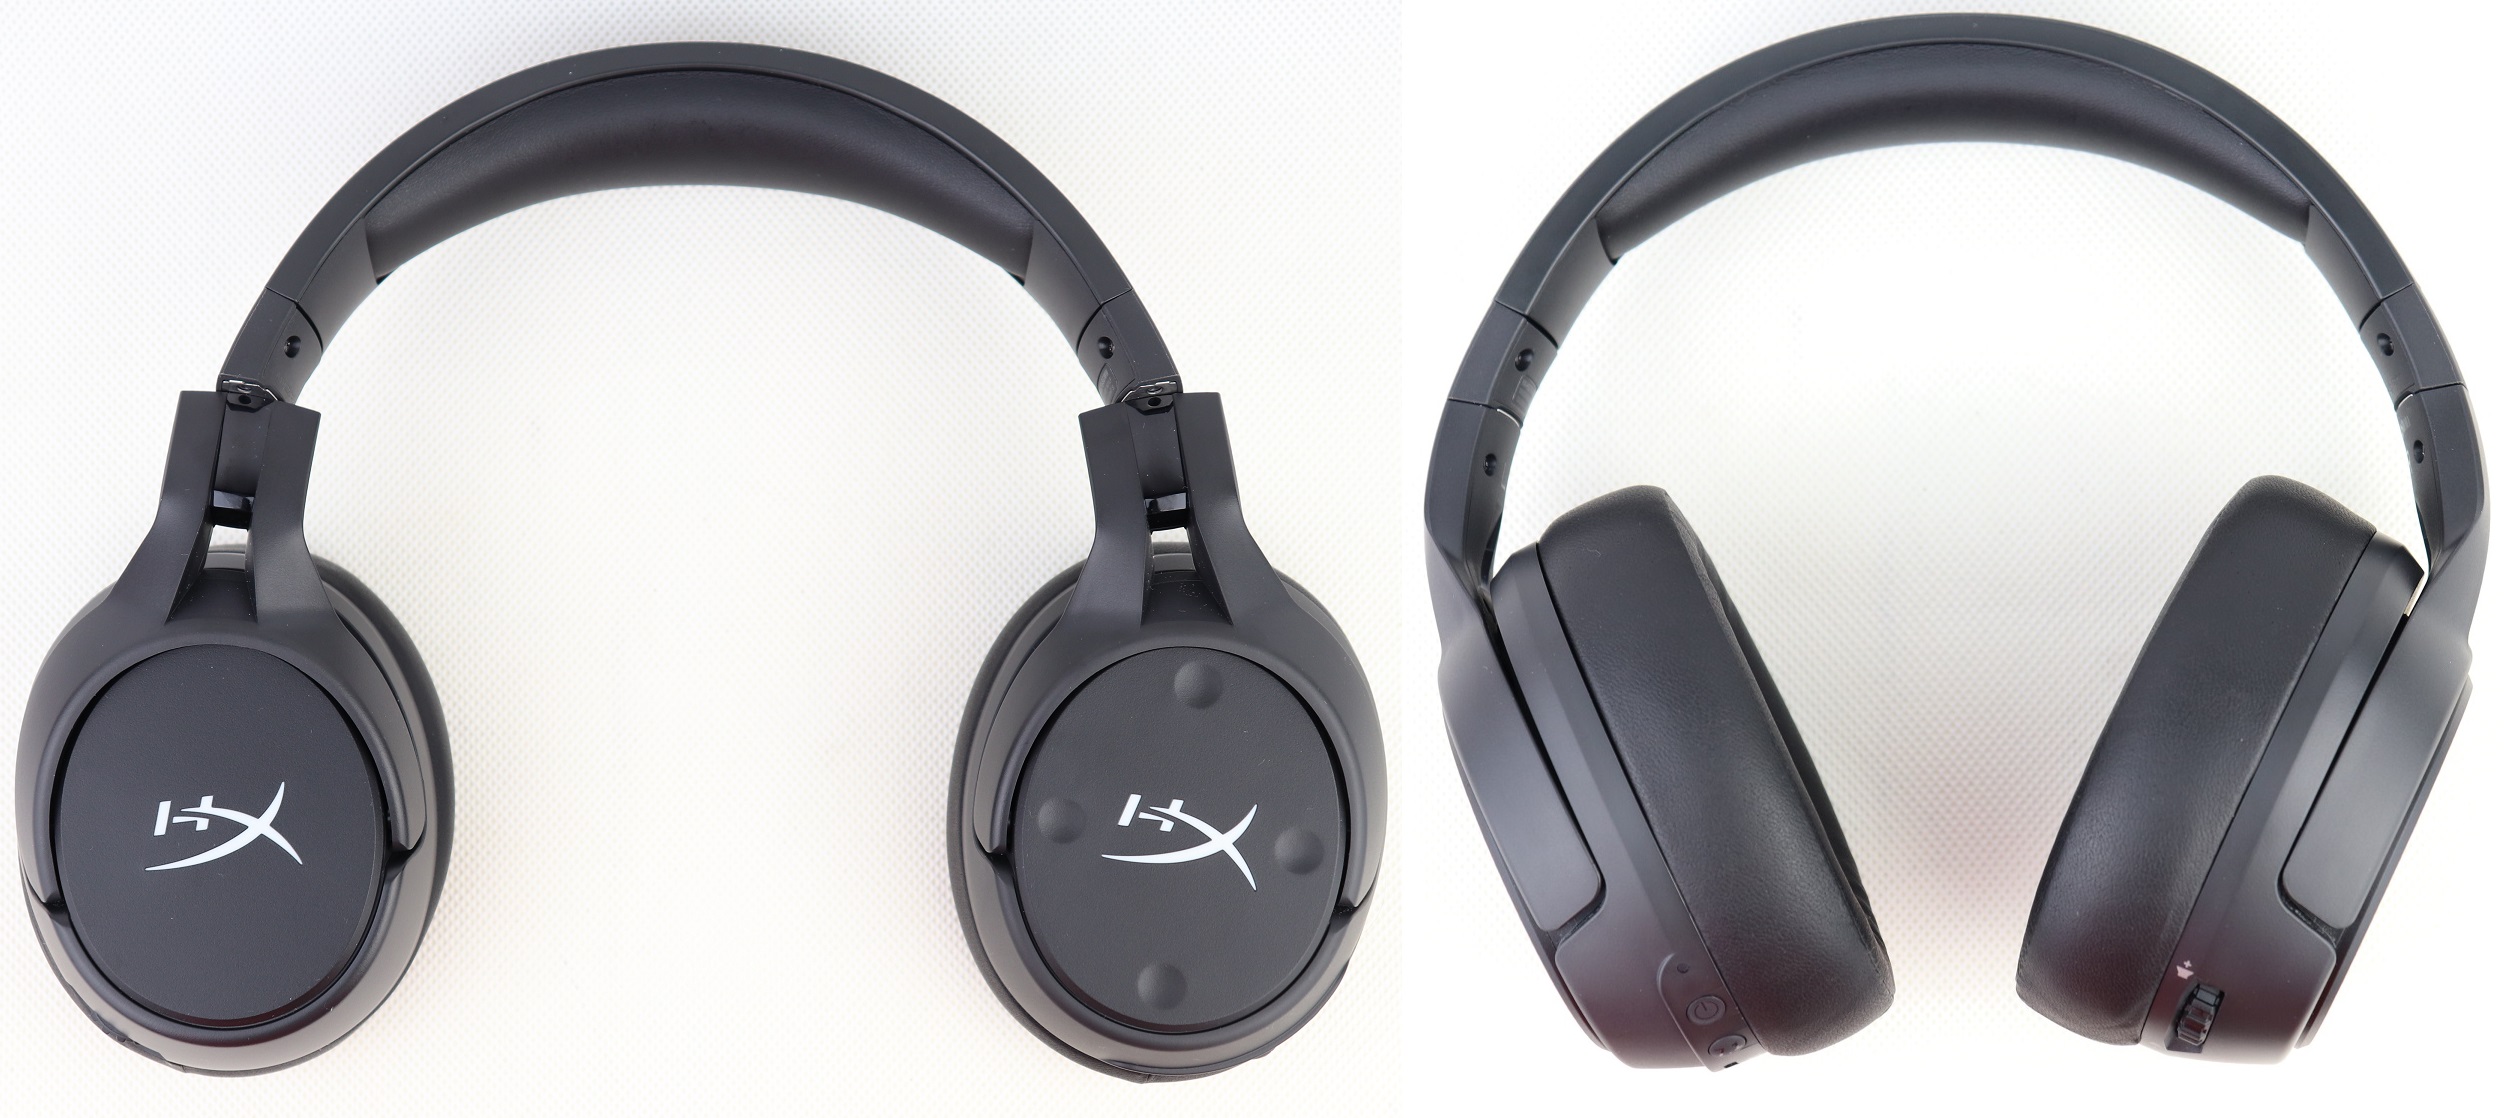 Unboxing And Review Of Hyperx Cloud Flight S Wireless Gaming Headset Unbxtech